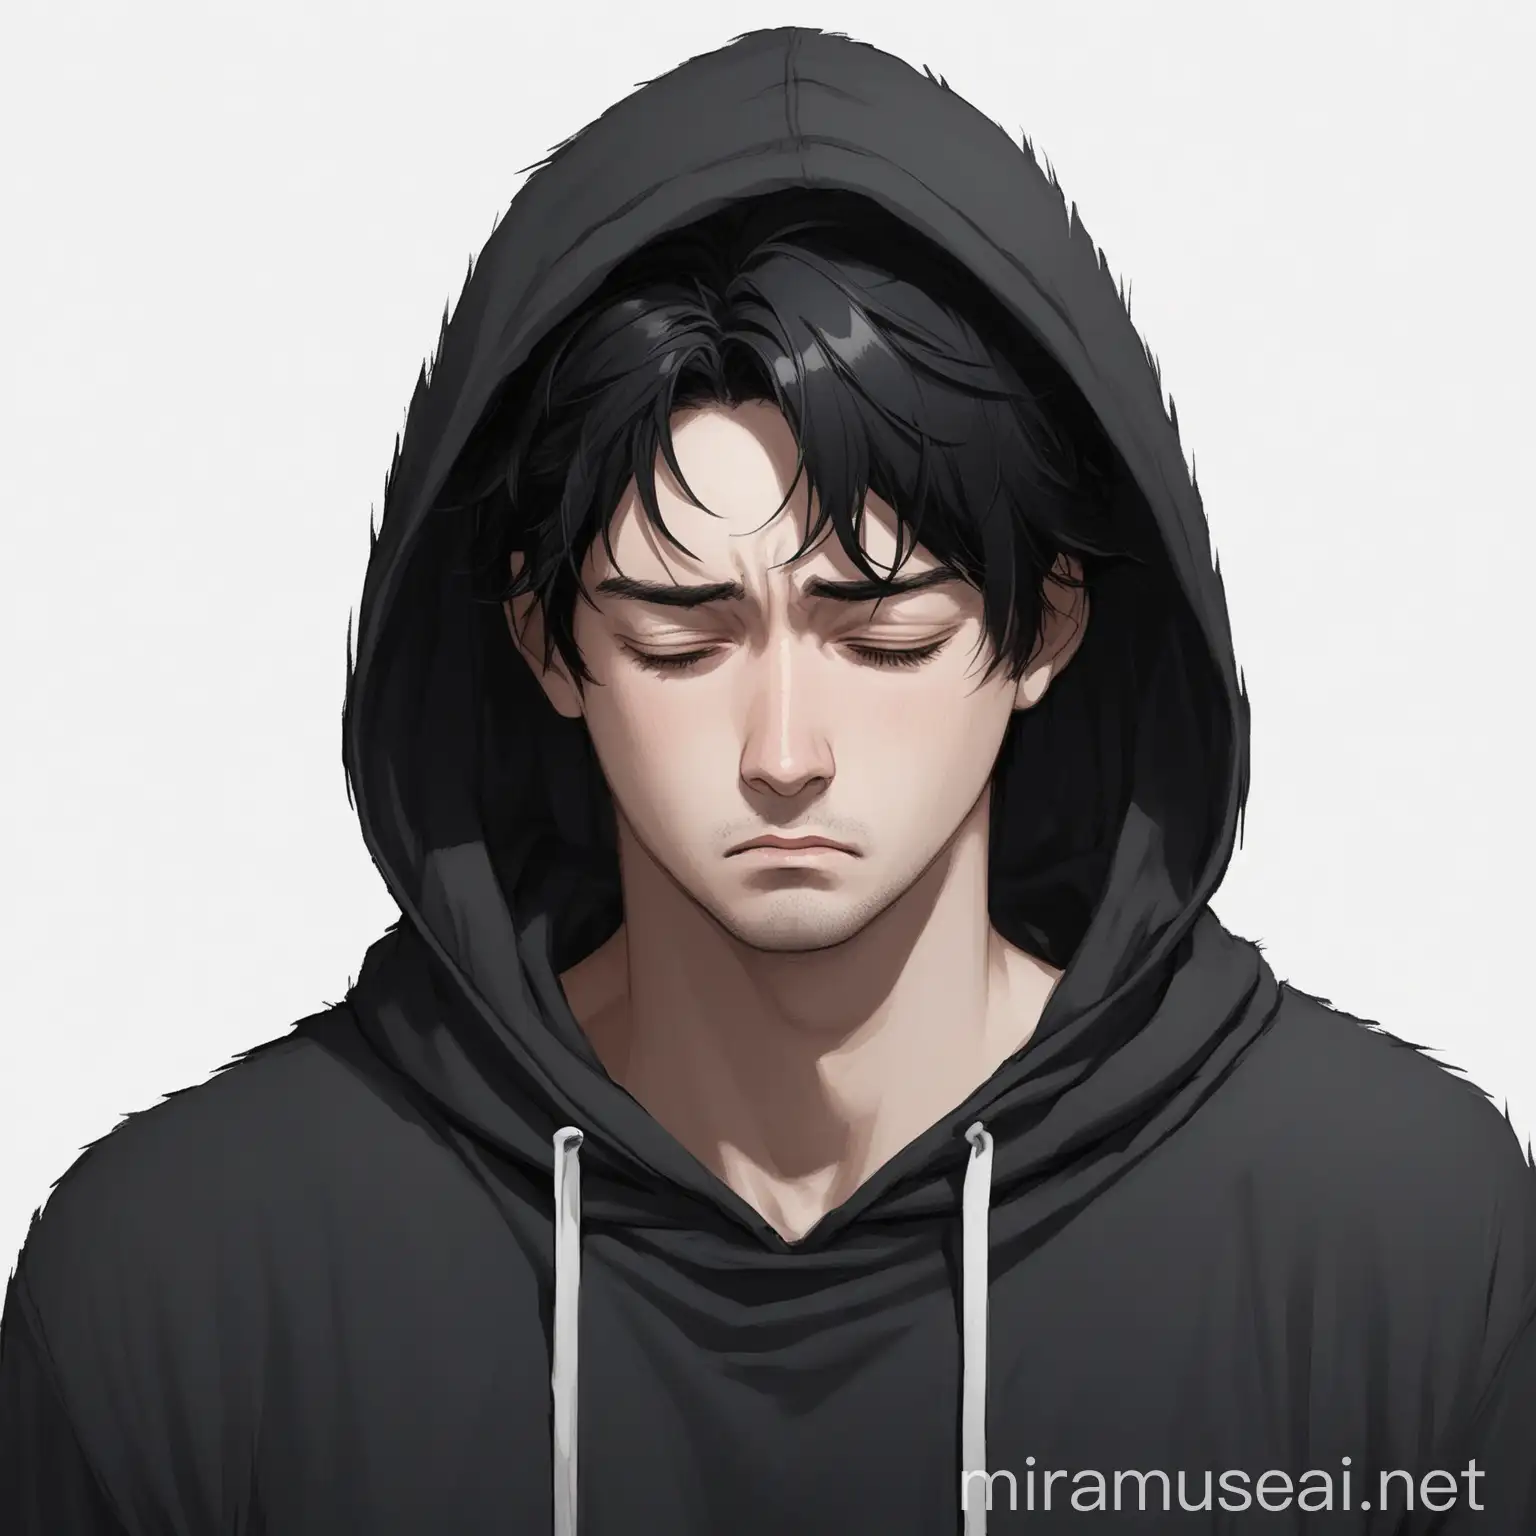 Tired BlackHaired Man in Black Hoodie on White Background